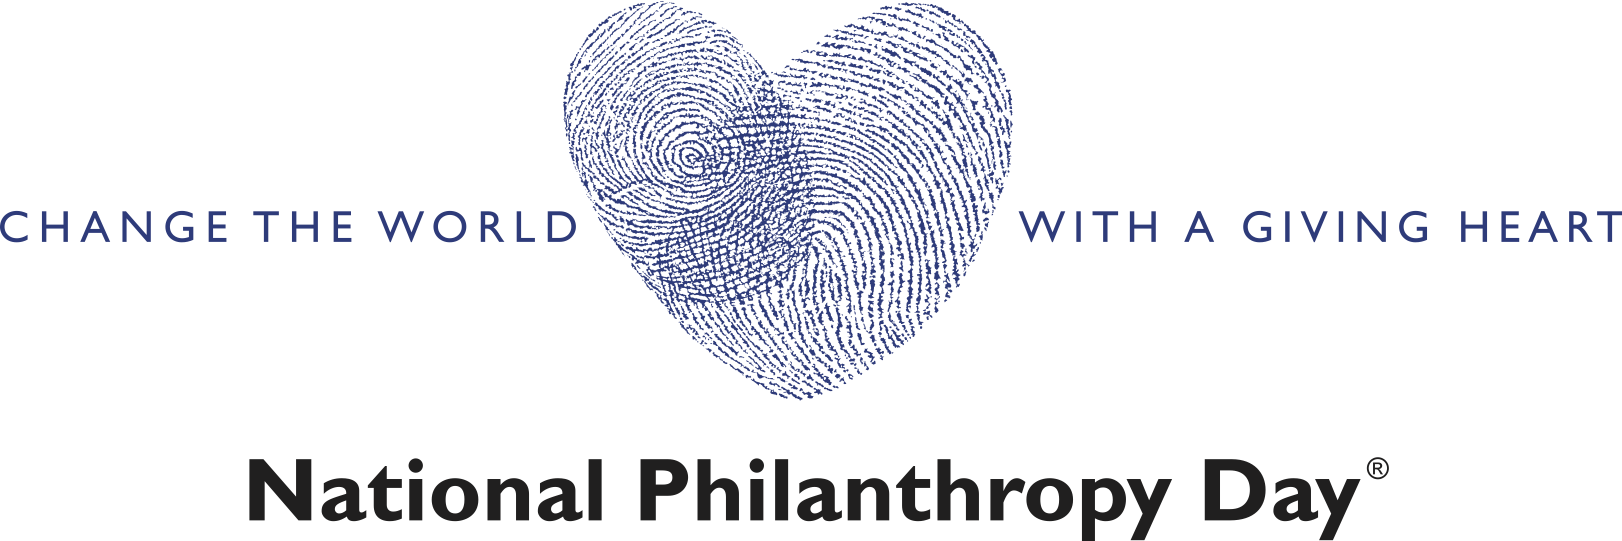 National Philanthropy Day in Canada